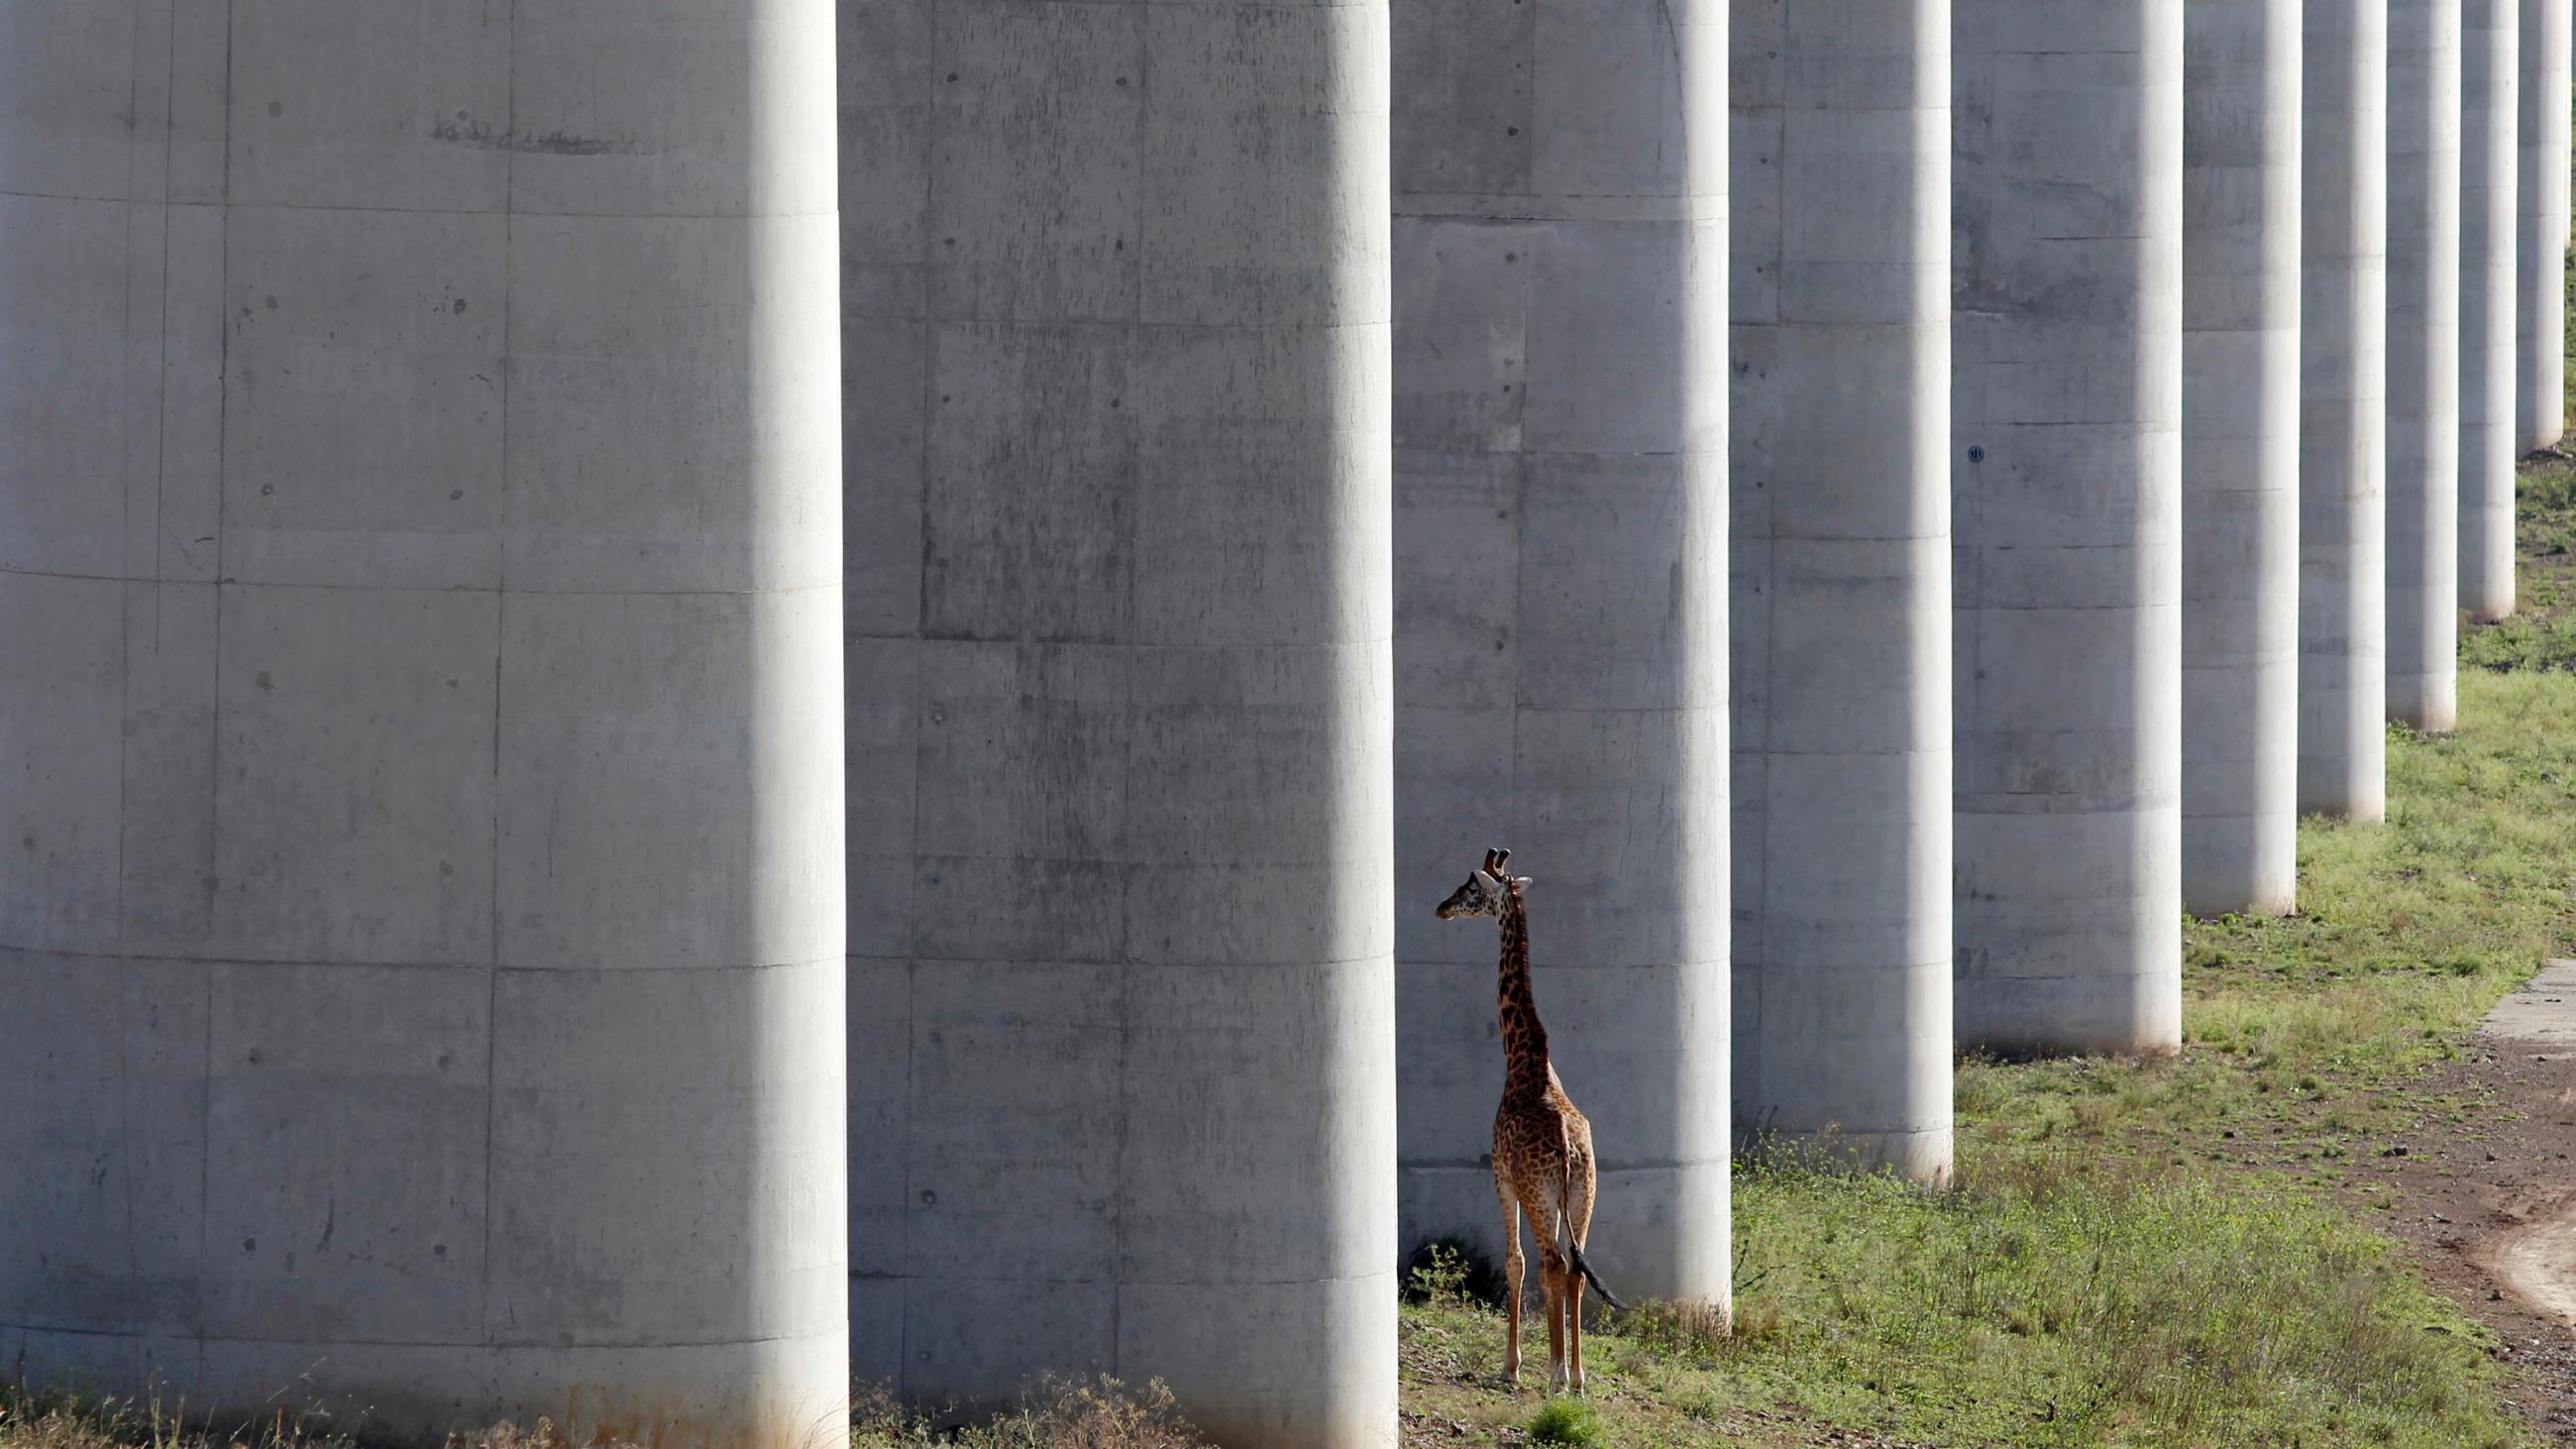 Photo shows a high bridge constructed in such a way that animals can pass freely beneath its support structure. 